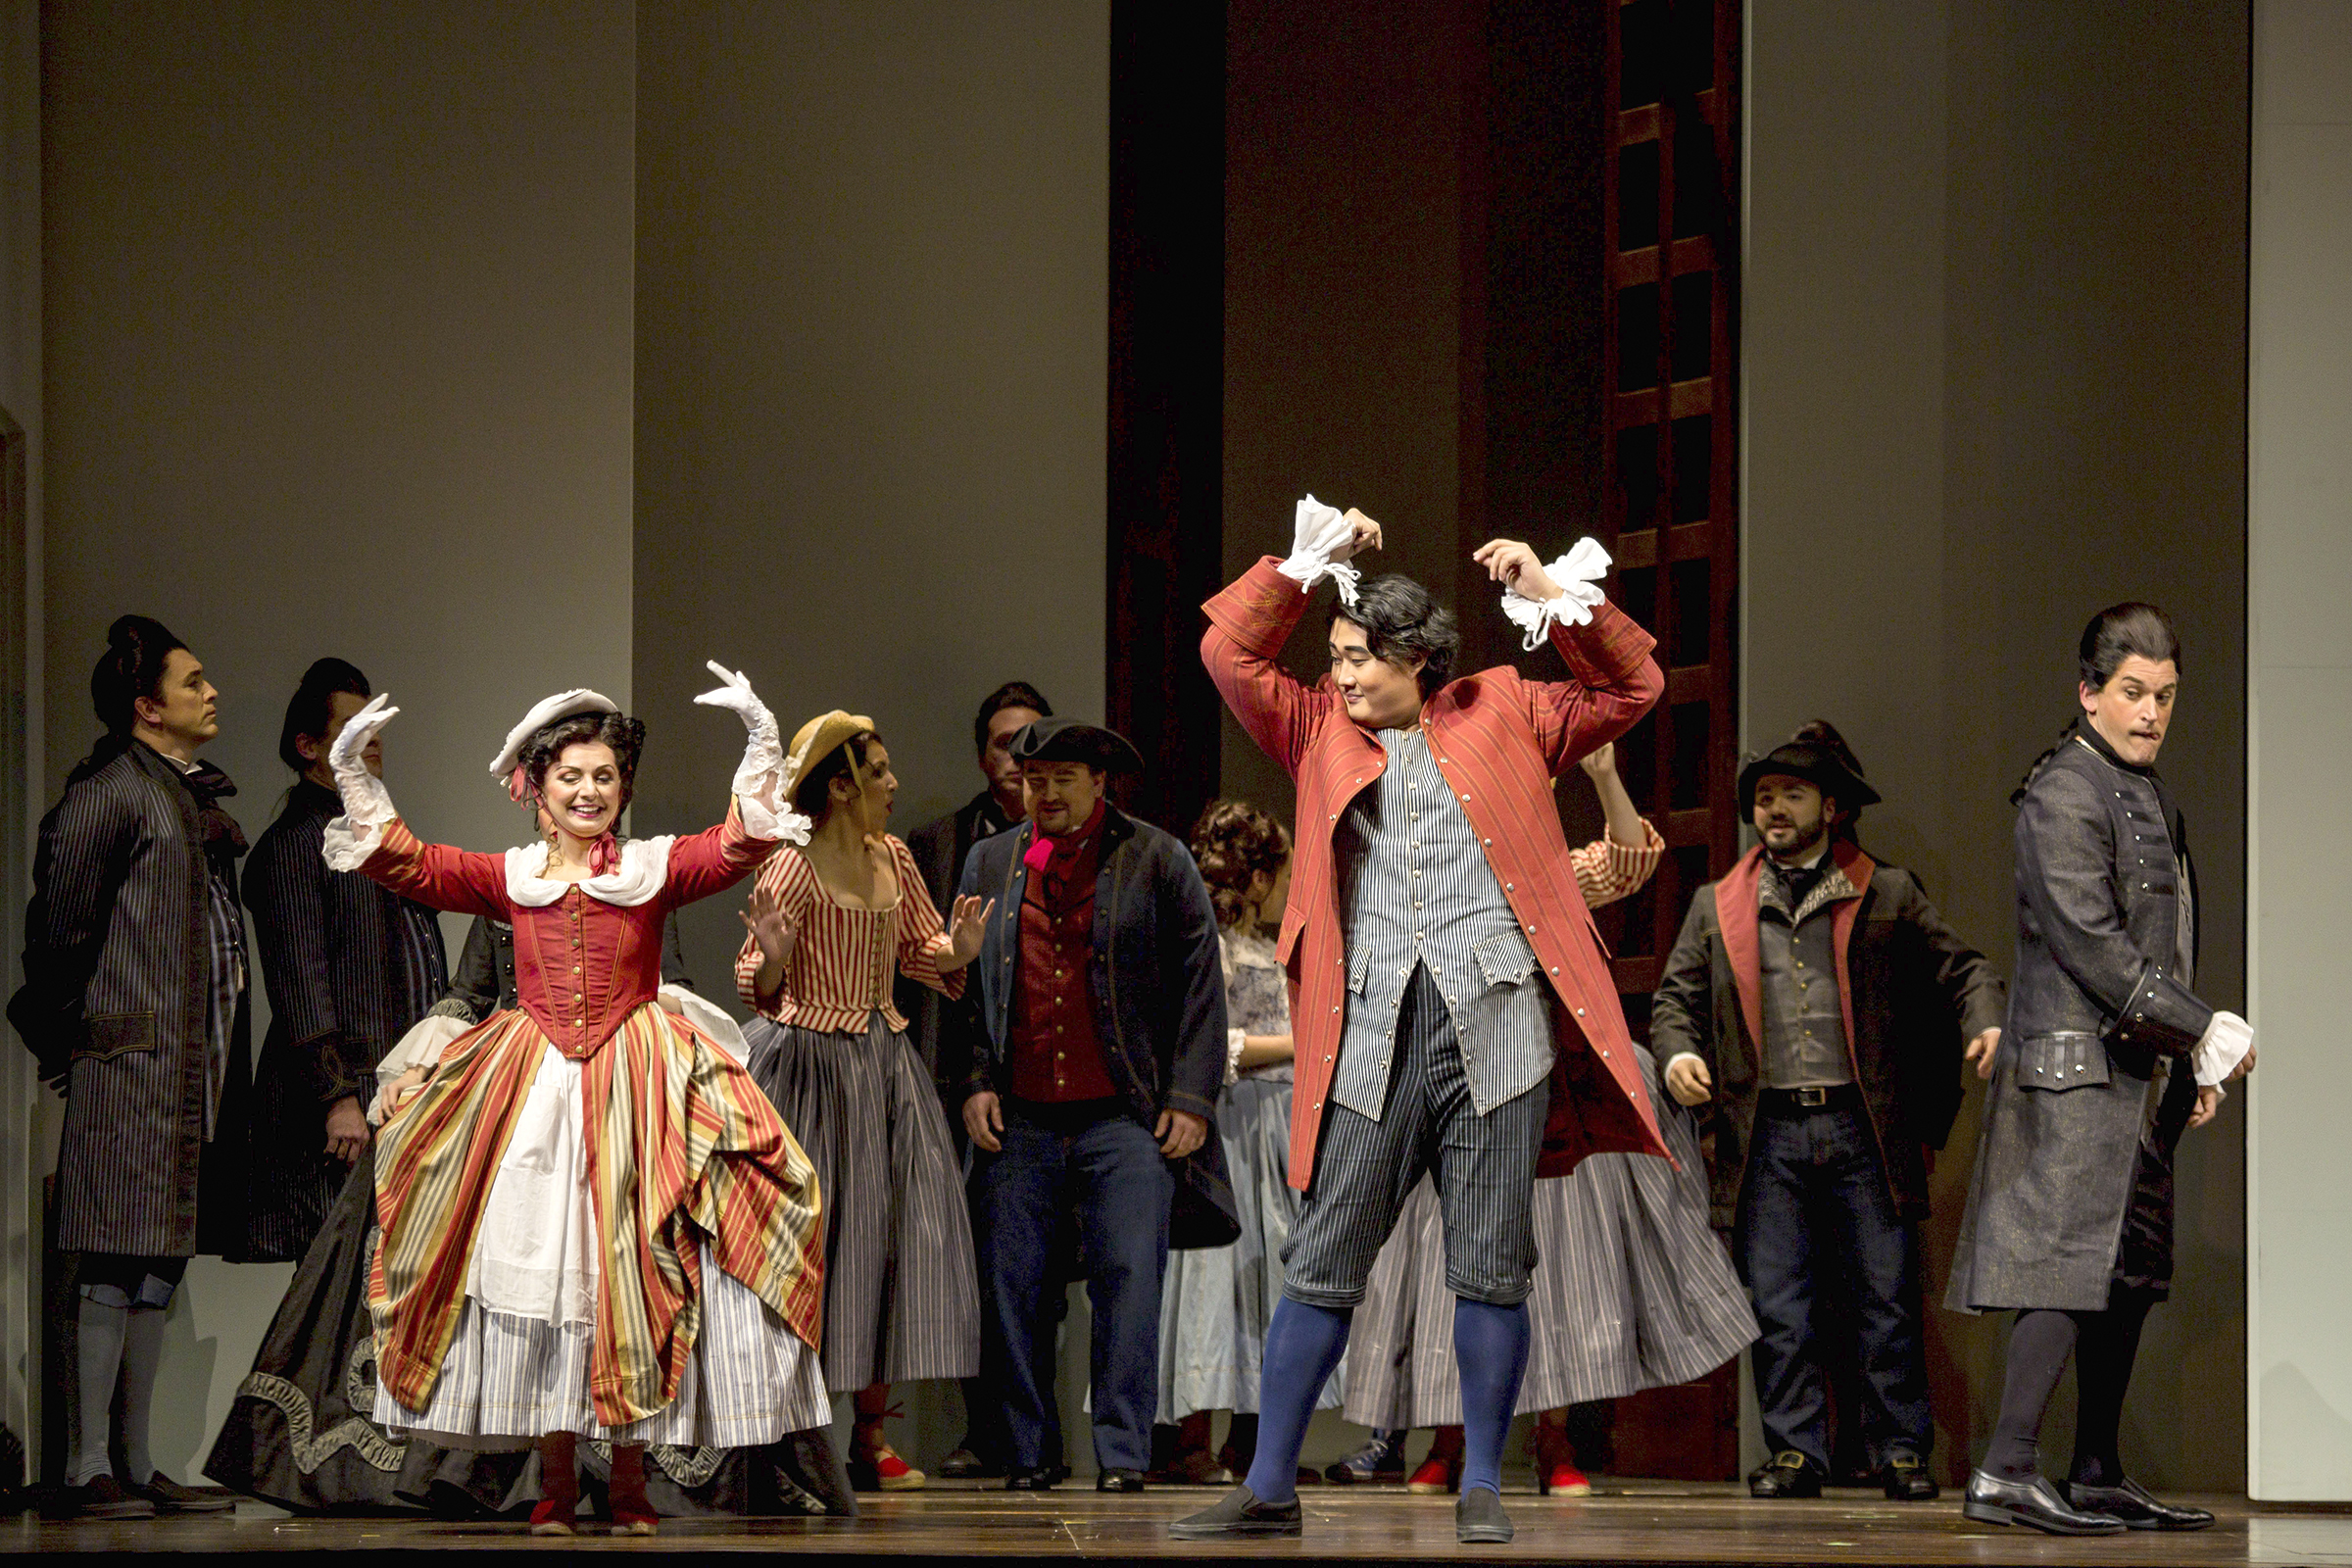 Focile and Shenyang as Susanna and Figaro at their wedding dance. Photo courtesy of Seattle Opera